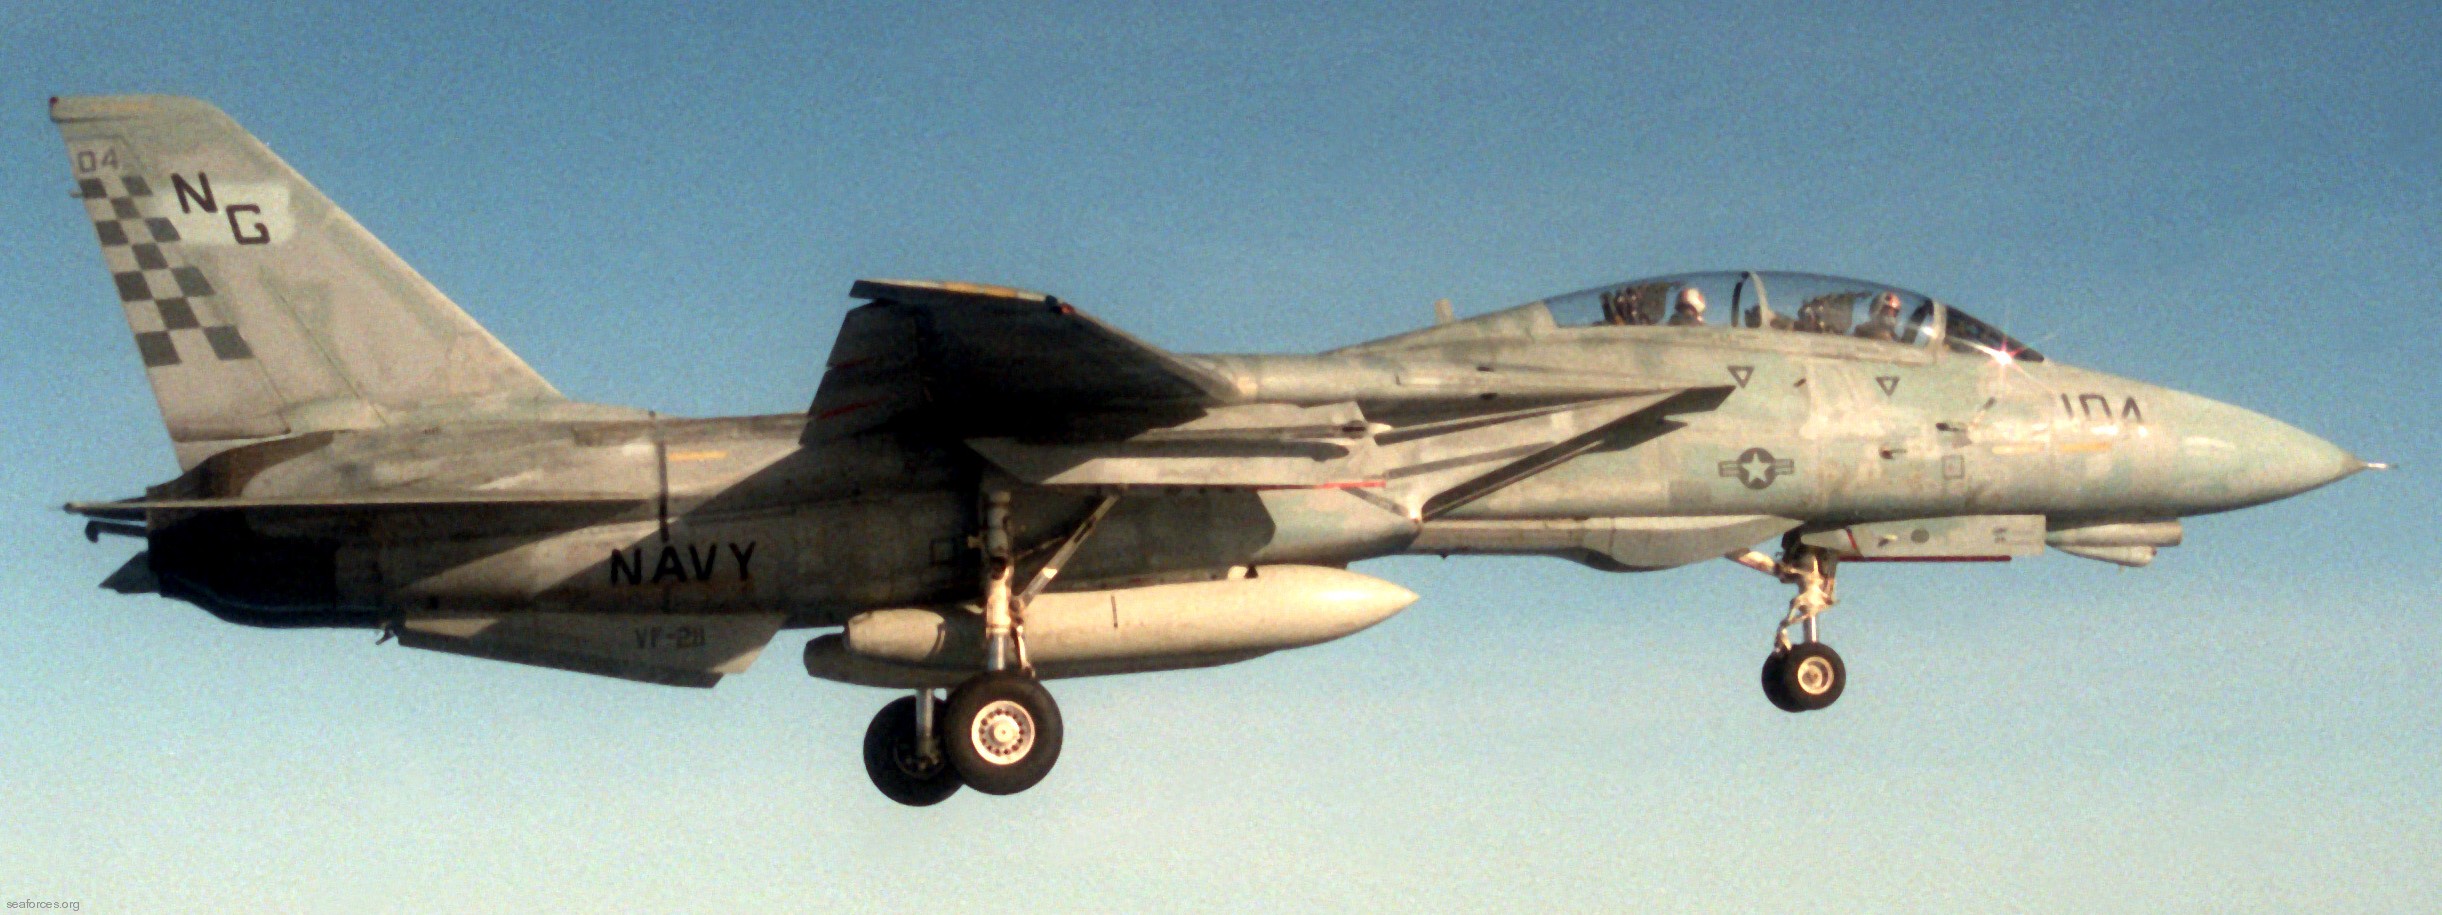 vf-211 fighting checkmates fighter squadron f-14a tomcat us navy carrier air wing cvw-9 uss kitty hawk cv-63 83